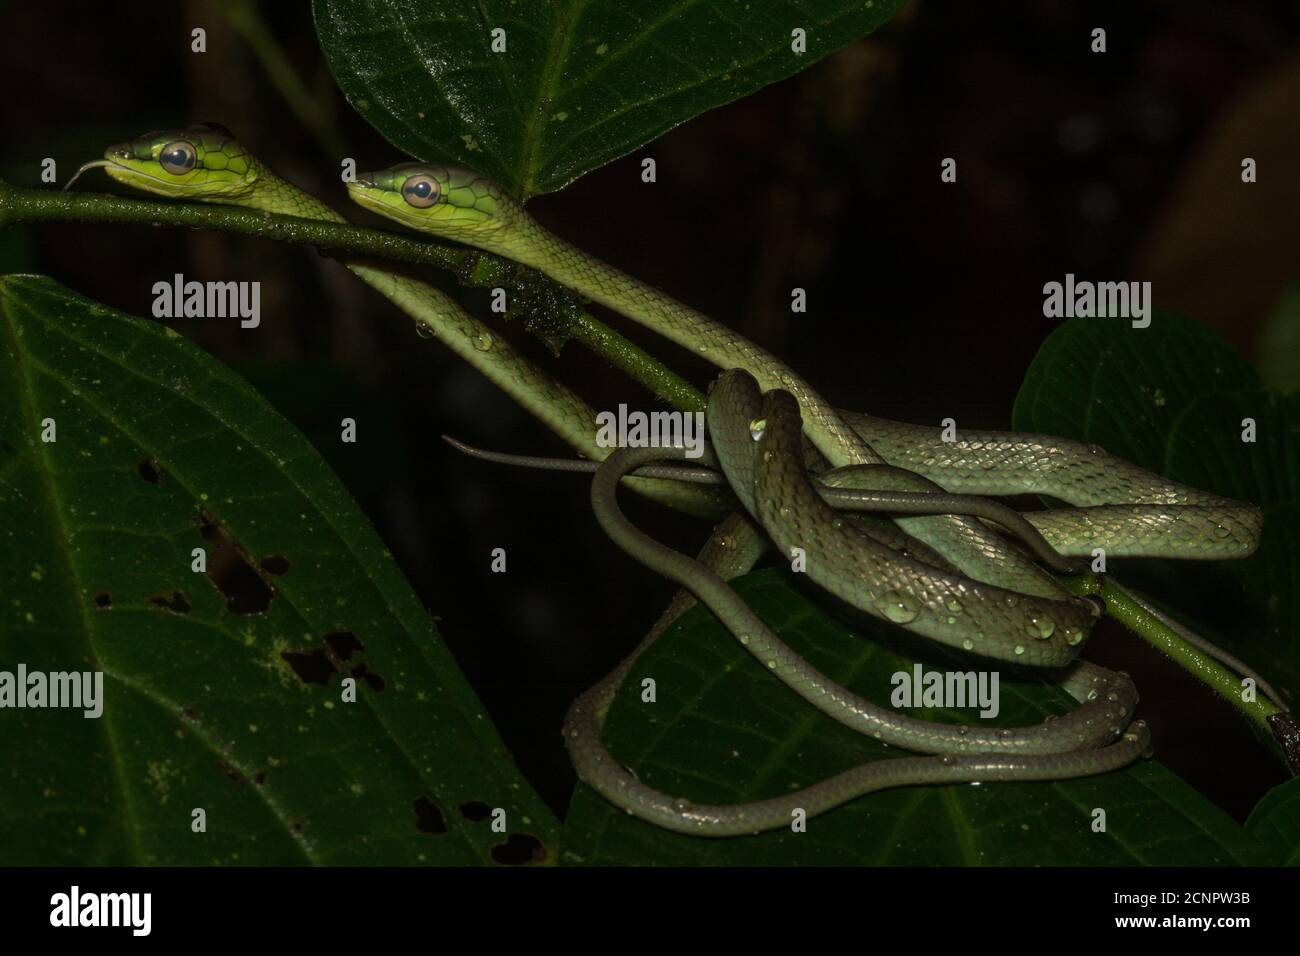 Cope's vine snakes (Oxybelis brevirostris) coiled together on a tree branch in the Ecuadorian rainforest. Stock Photo